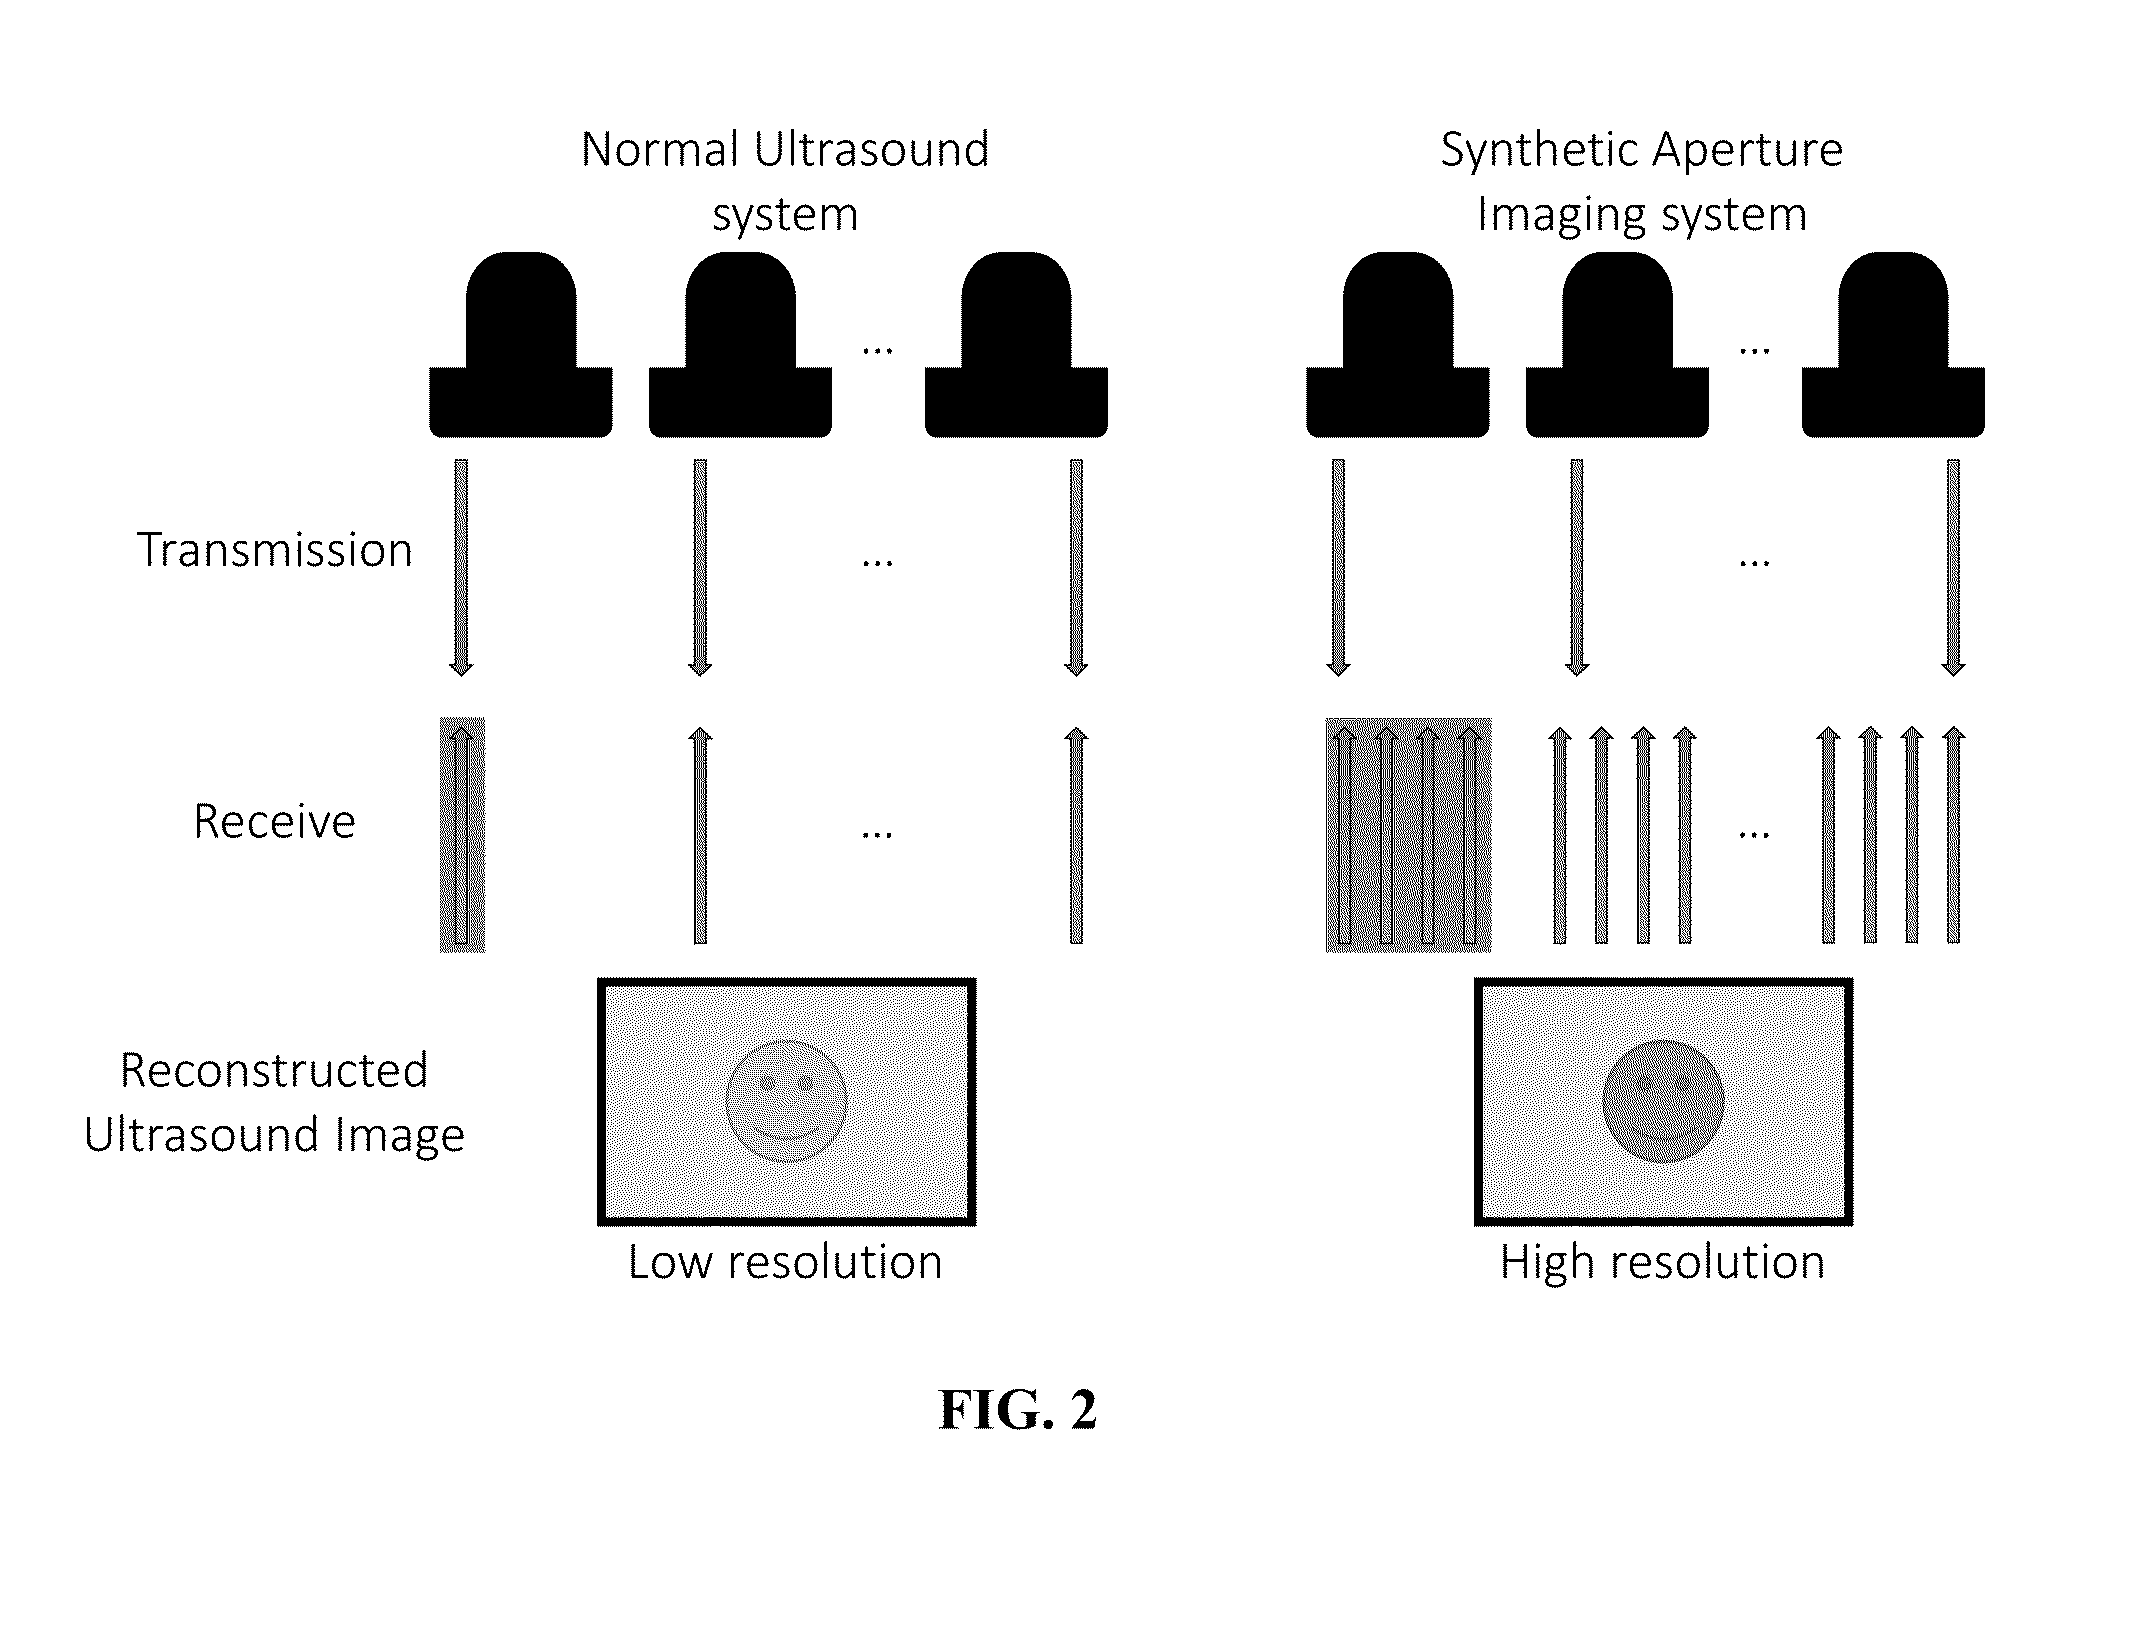 Synthetic aperture ultrasound system